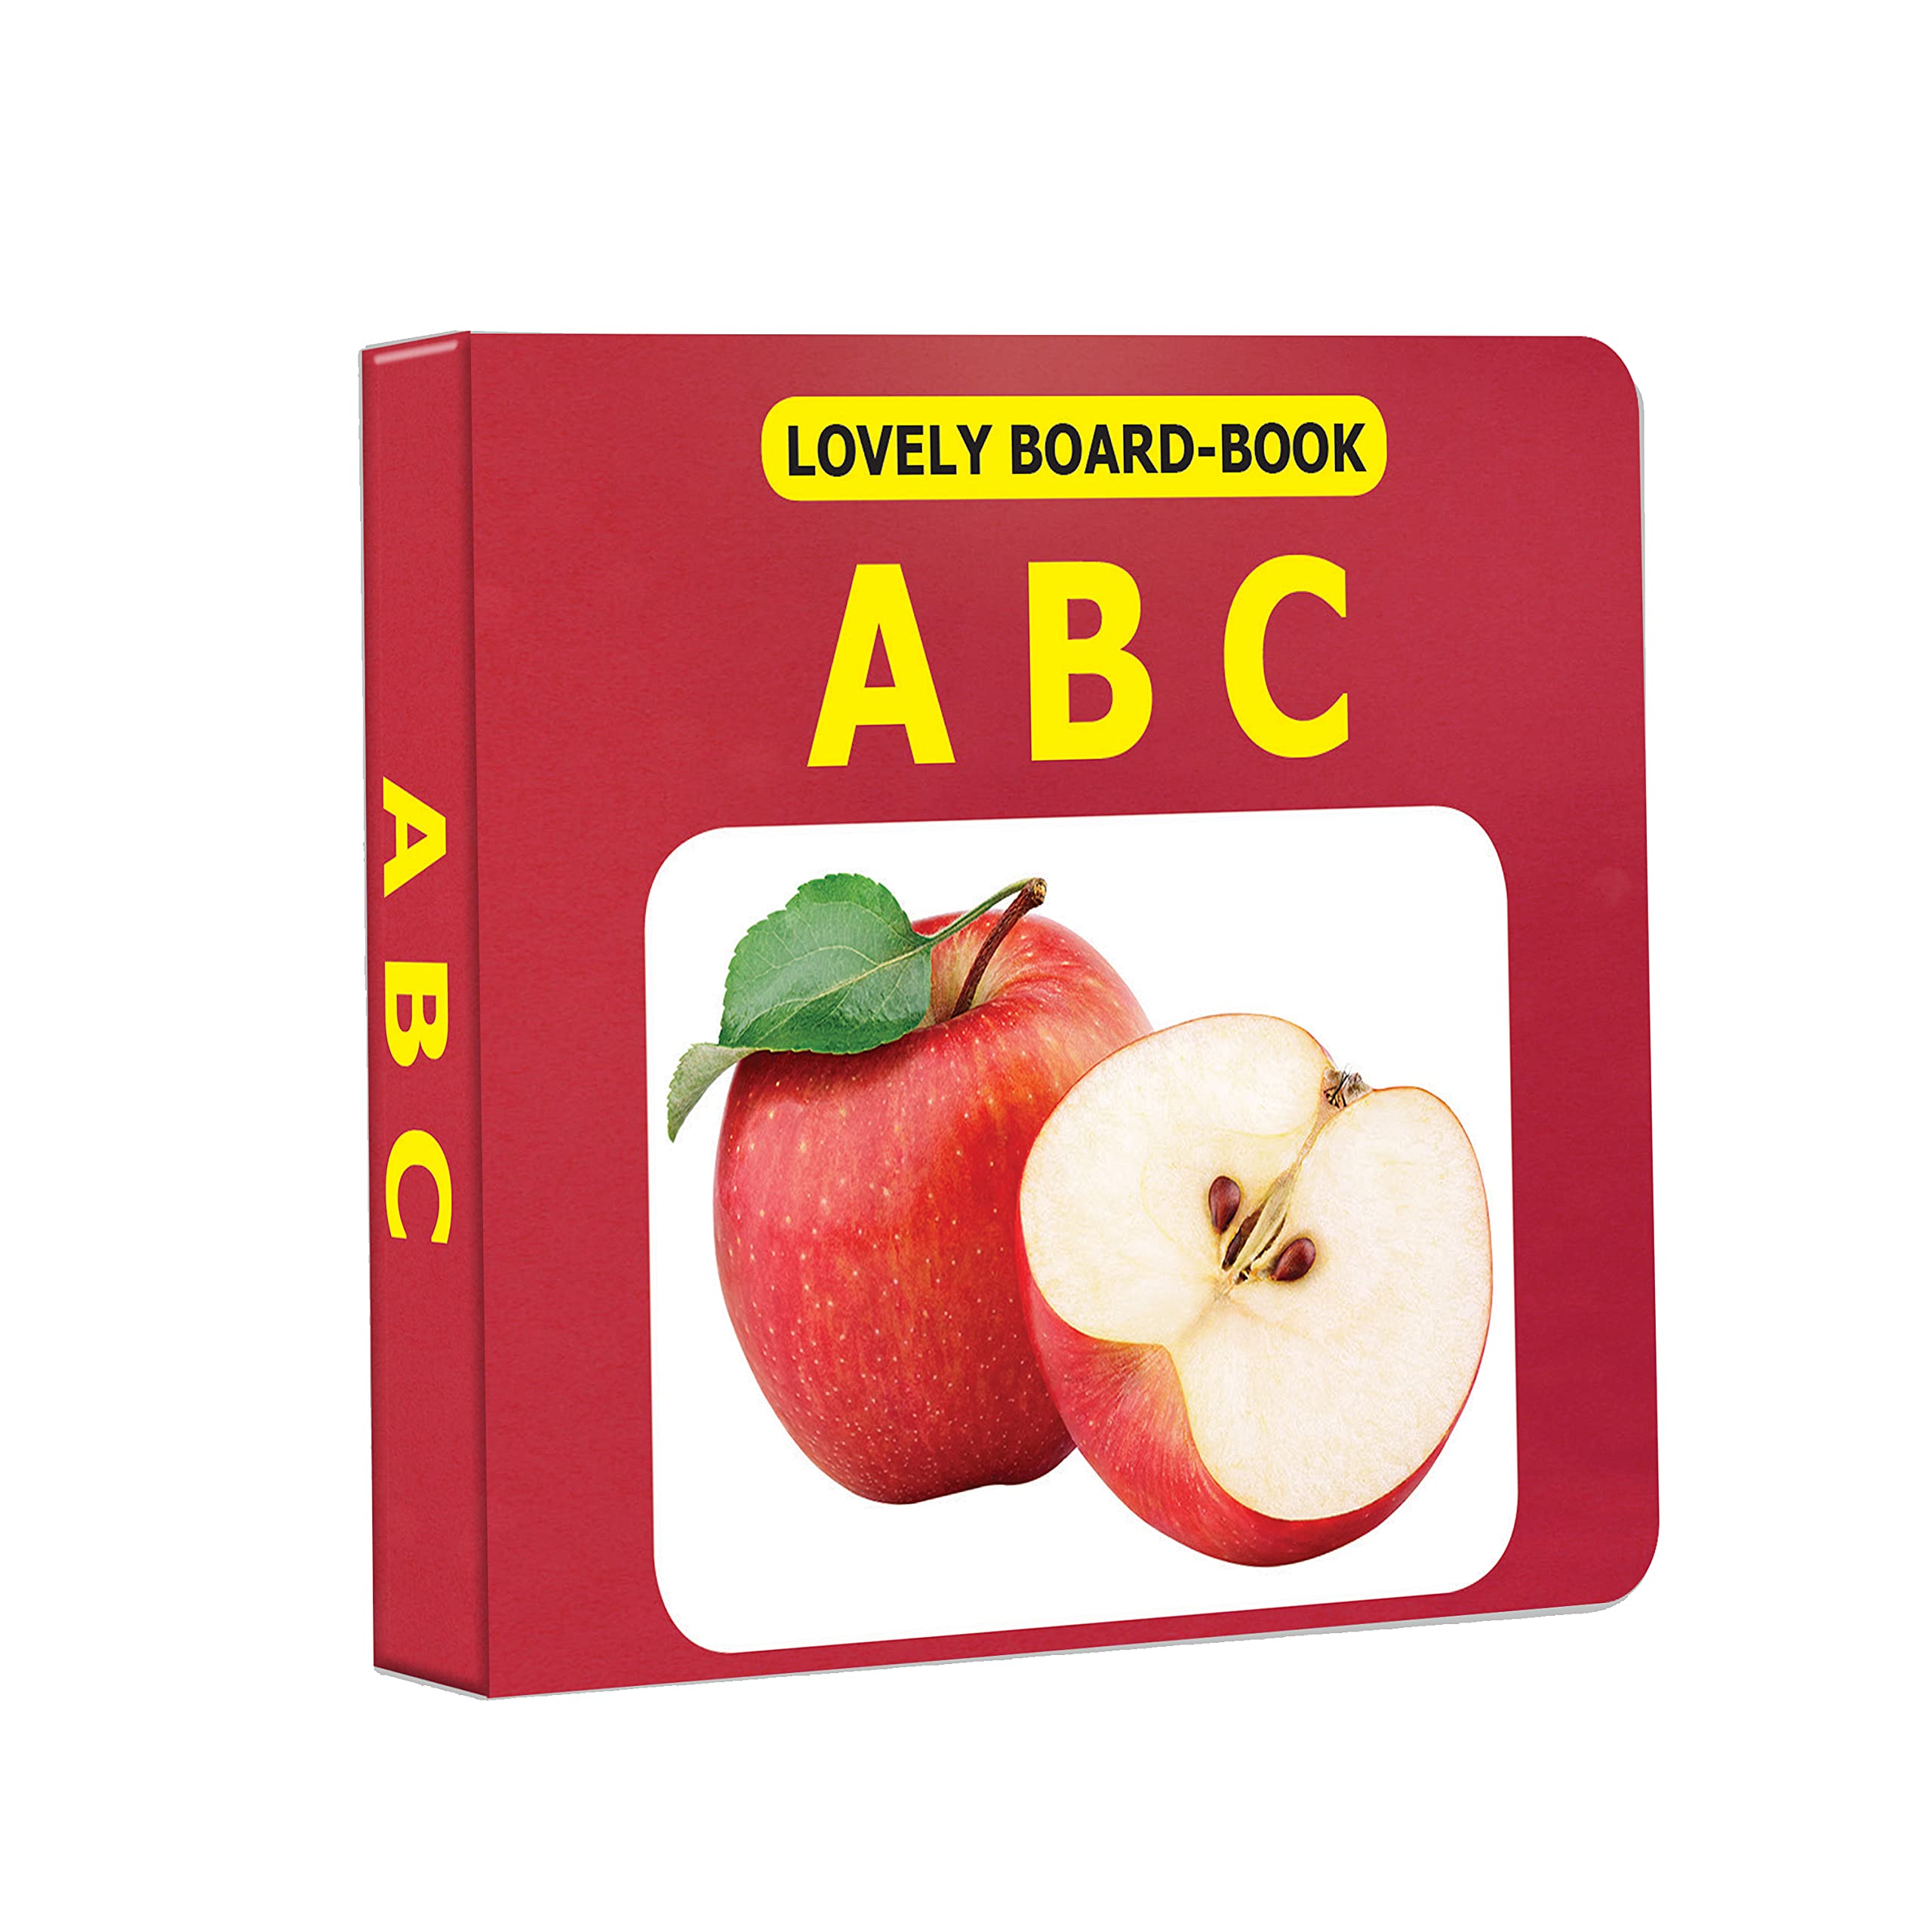 ABC Board Book for Children Age 0 -2 Years